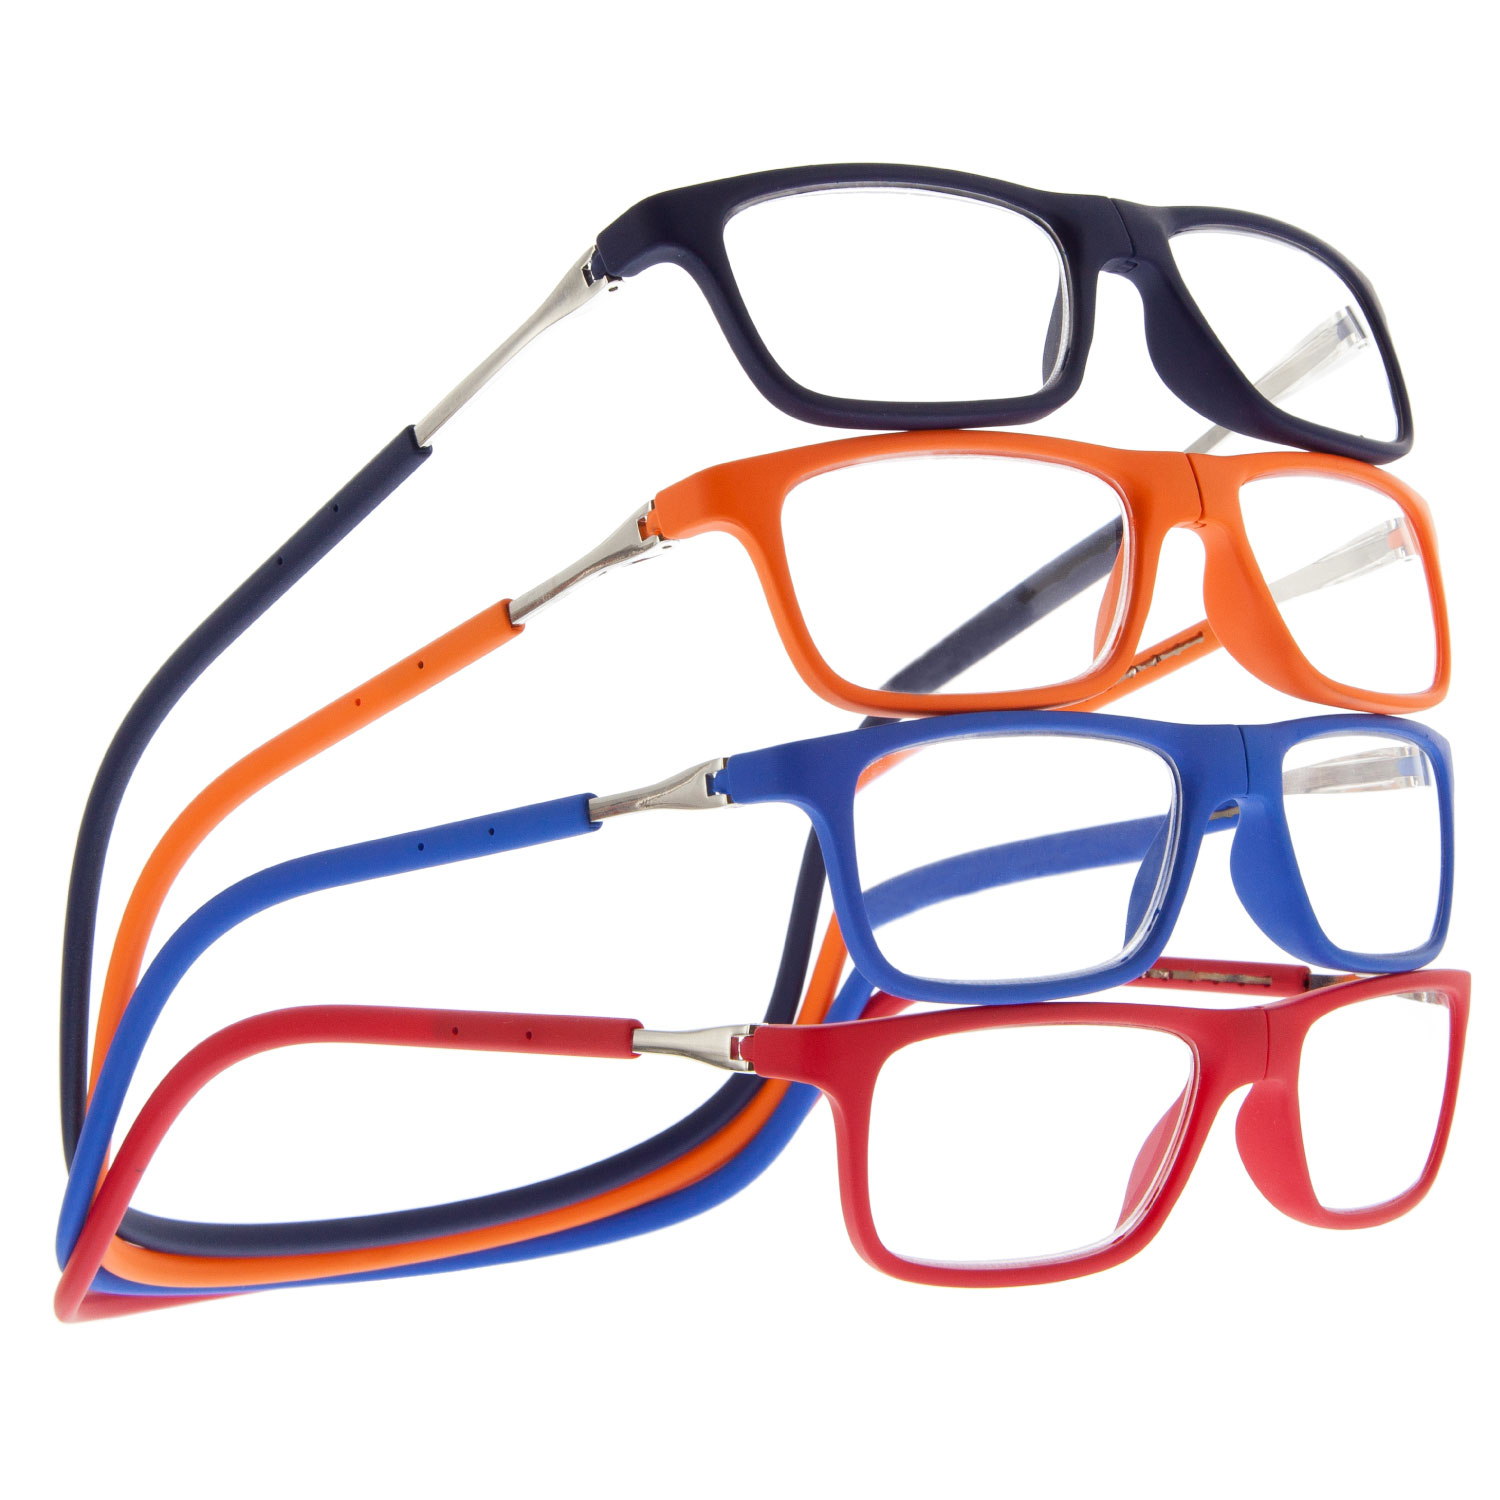 Faraday reading magnetic glasses